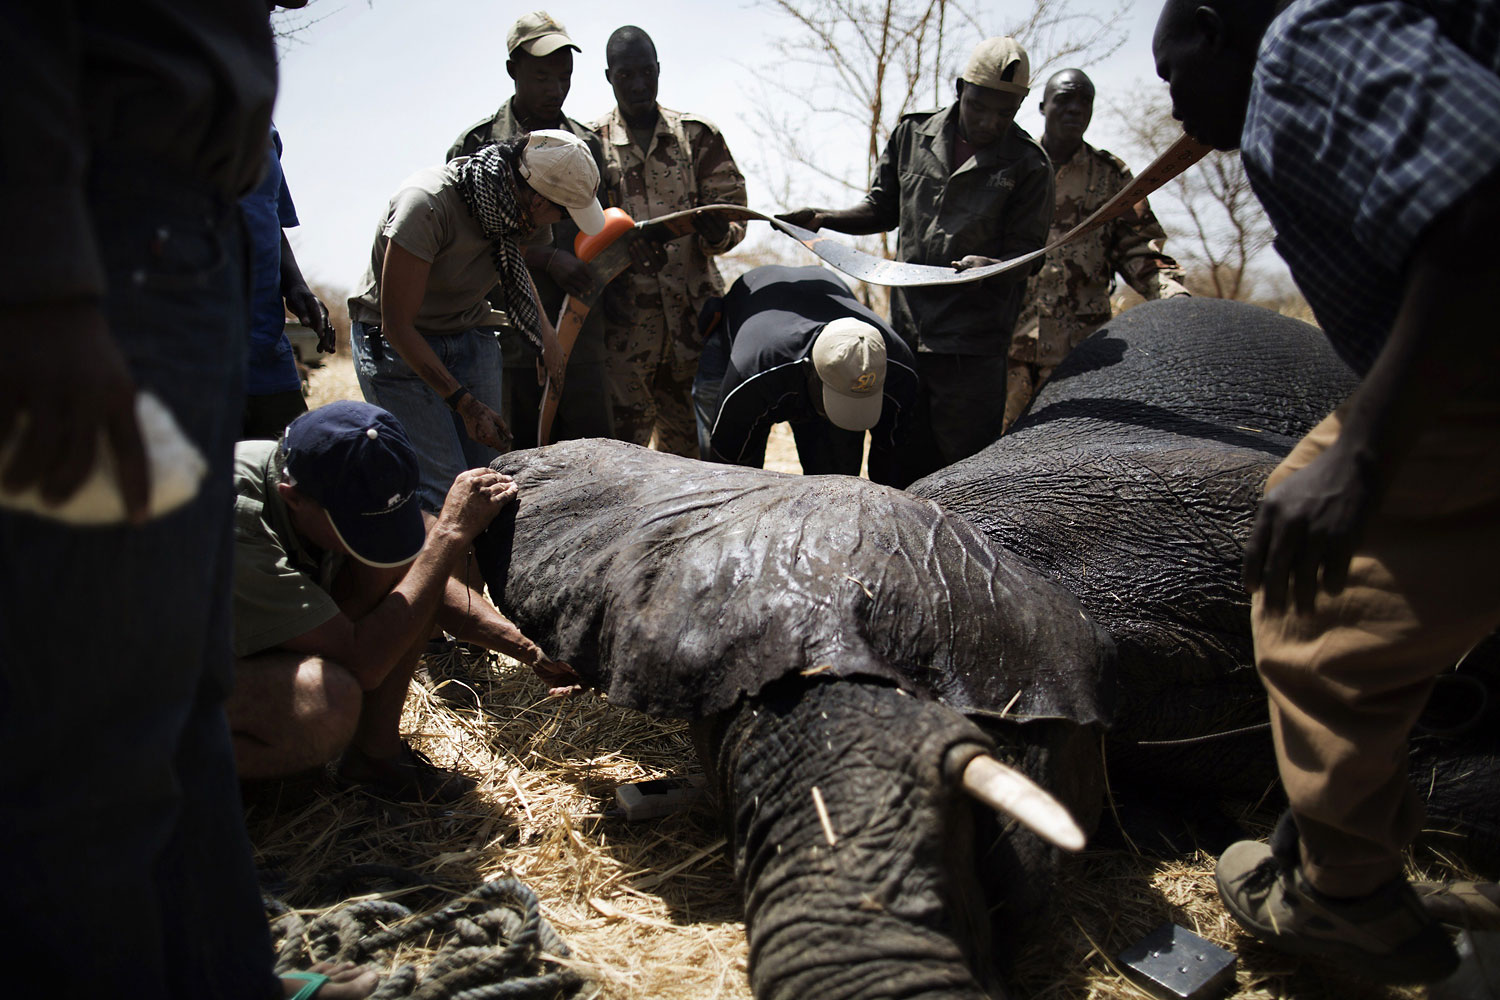 African Parks staff apply a collar to an elephant, darted at the Zakouma National Park on Feb. 23, 2014 during a collaring operation aimed at preserving elephants in the park.